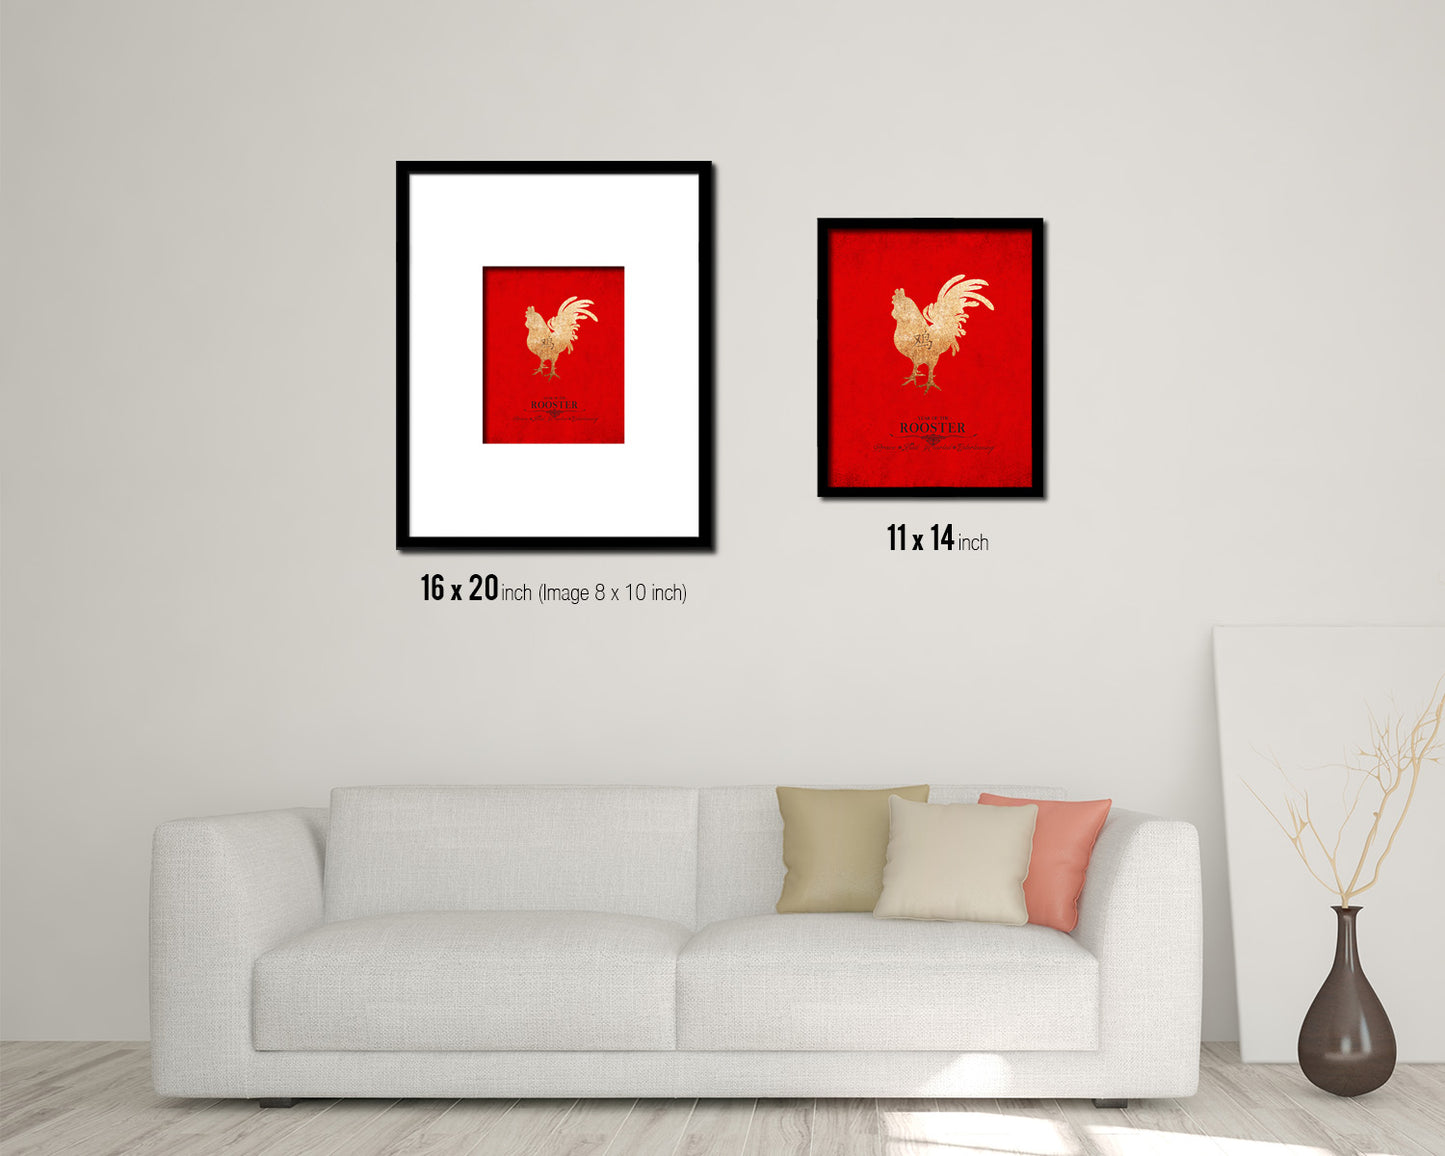 Rooster Chinese Zodiac Character Black Framed Art Paper Print Wall Art Decor Gifts, Red